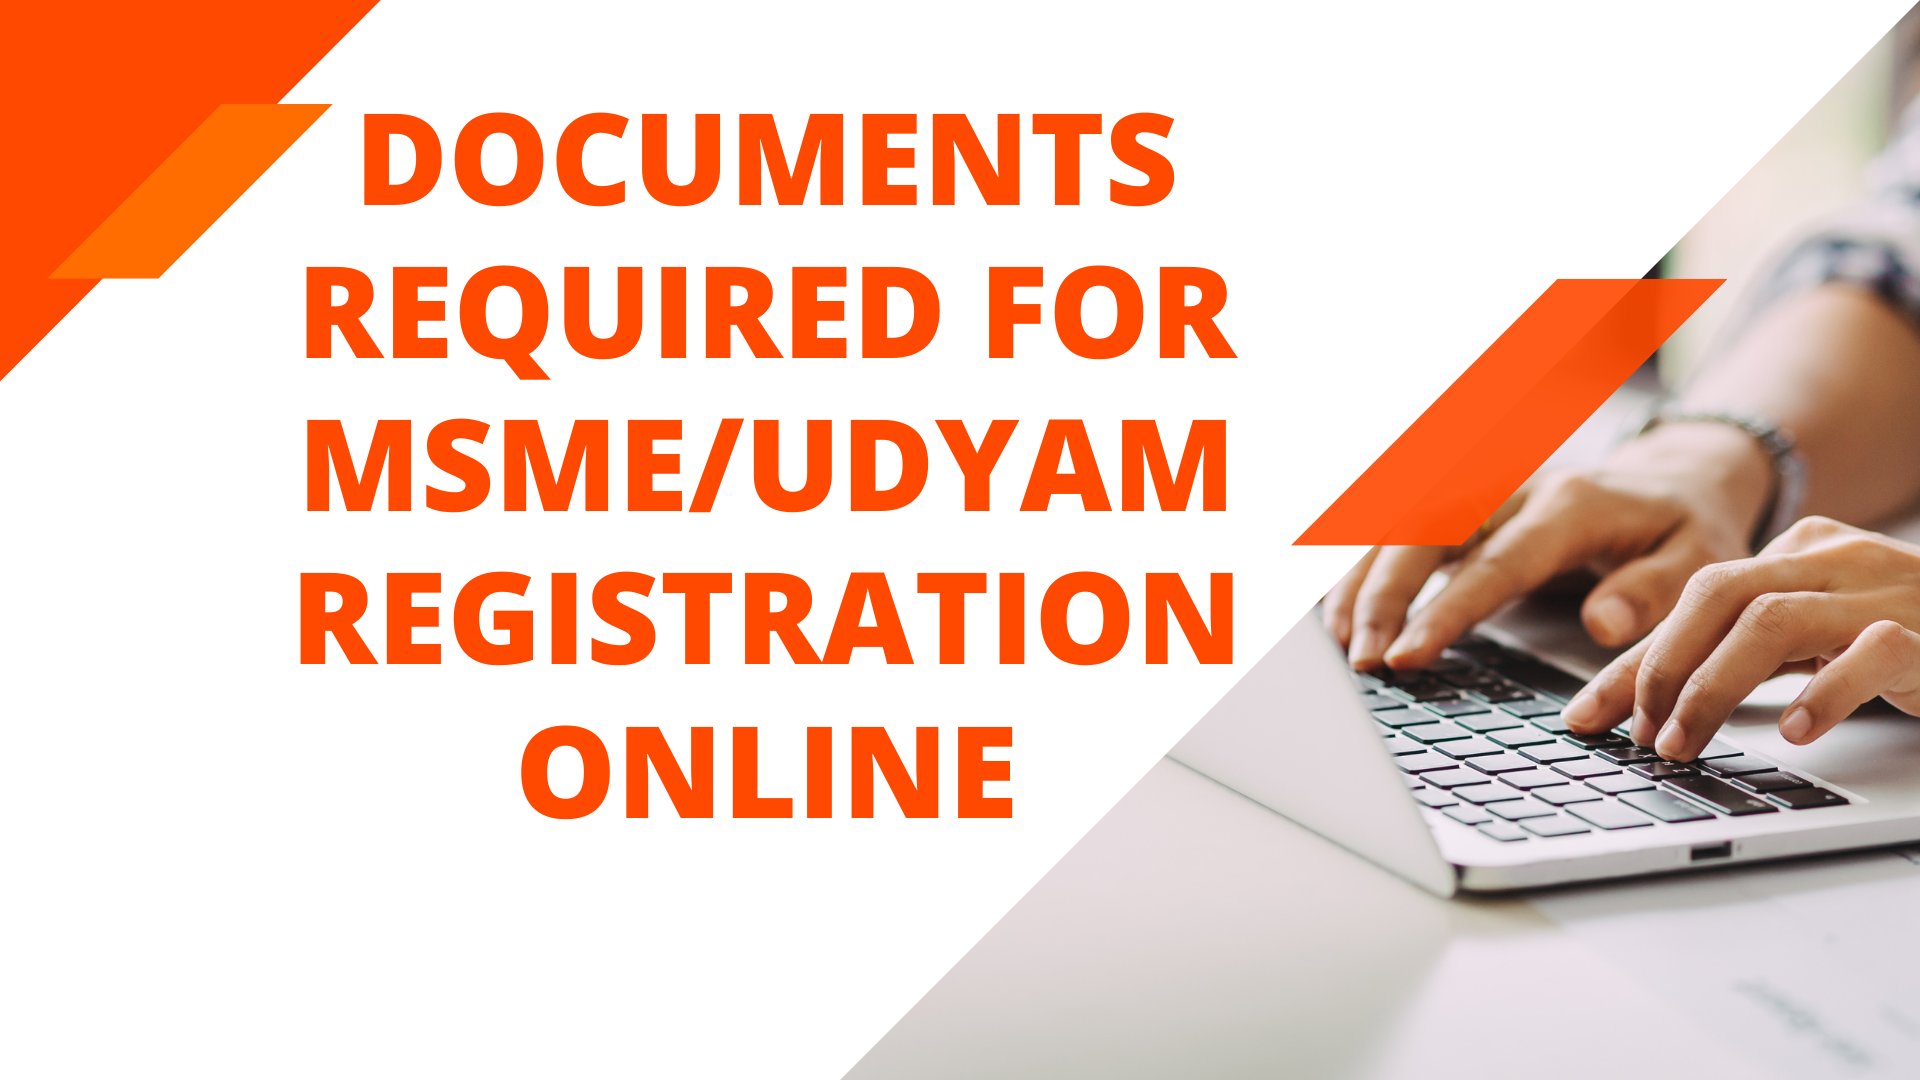 Documents Required for MSME/Udyam Registration Online